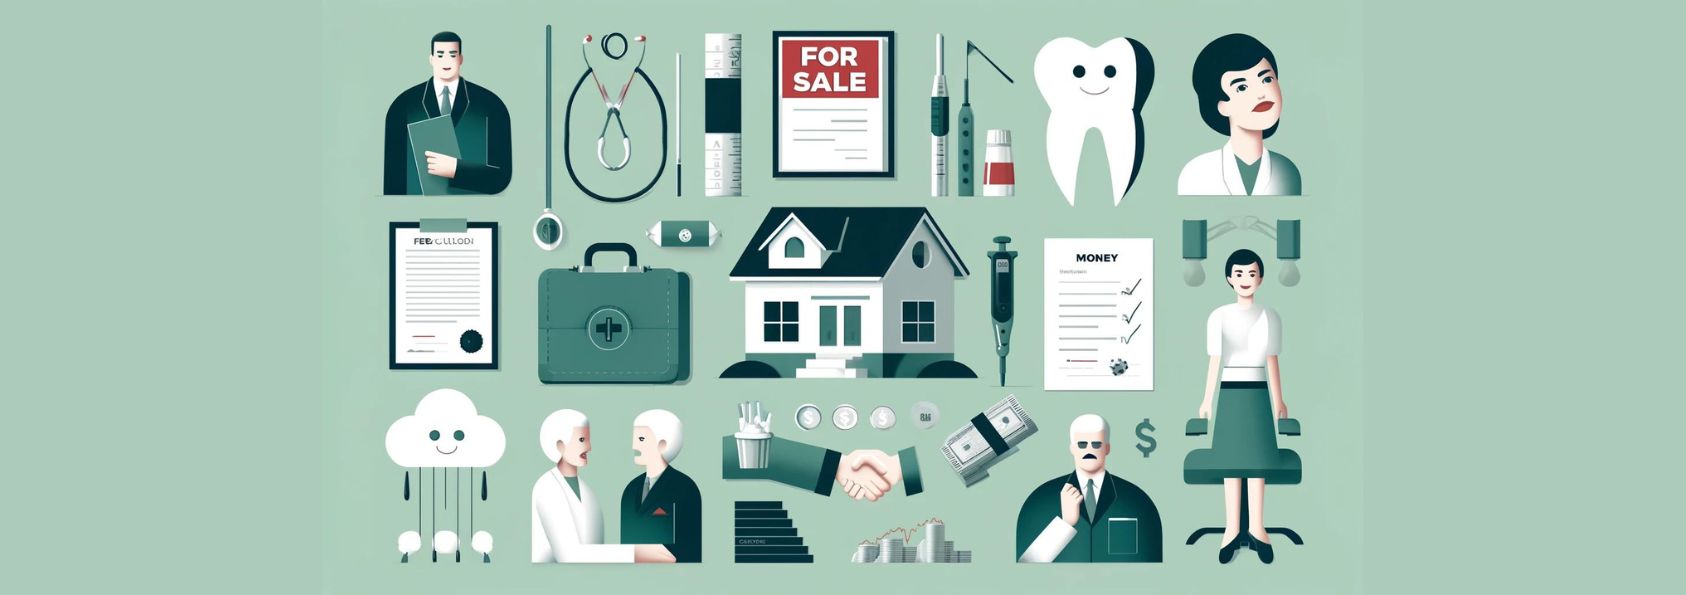 "Reasons for selling a dental practice